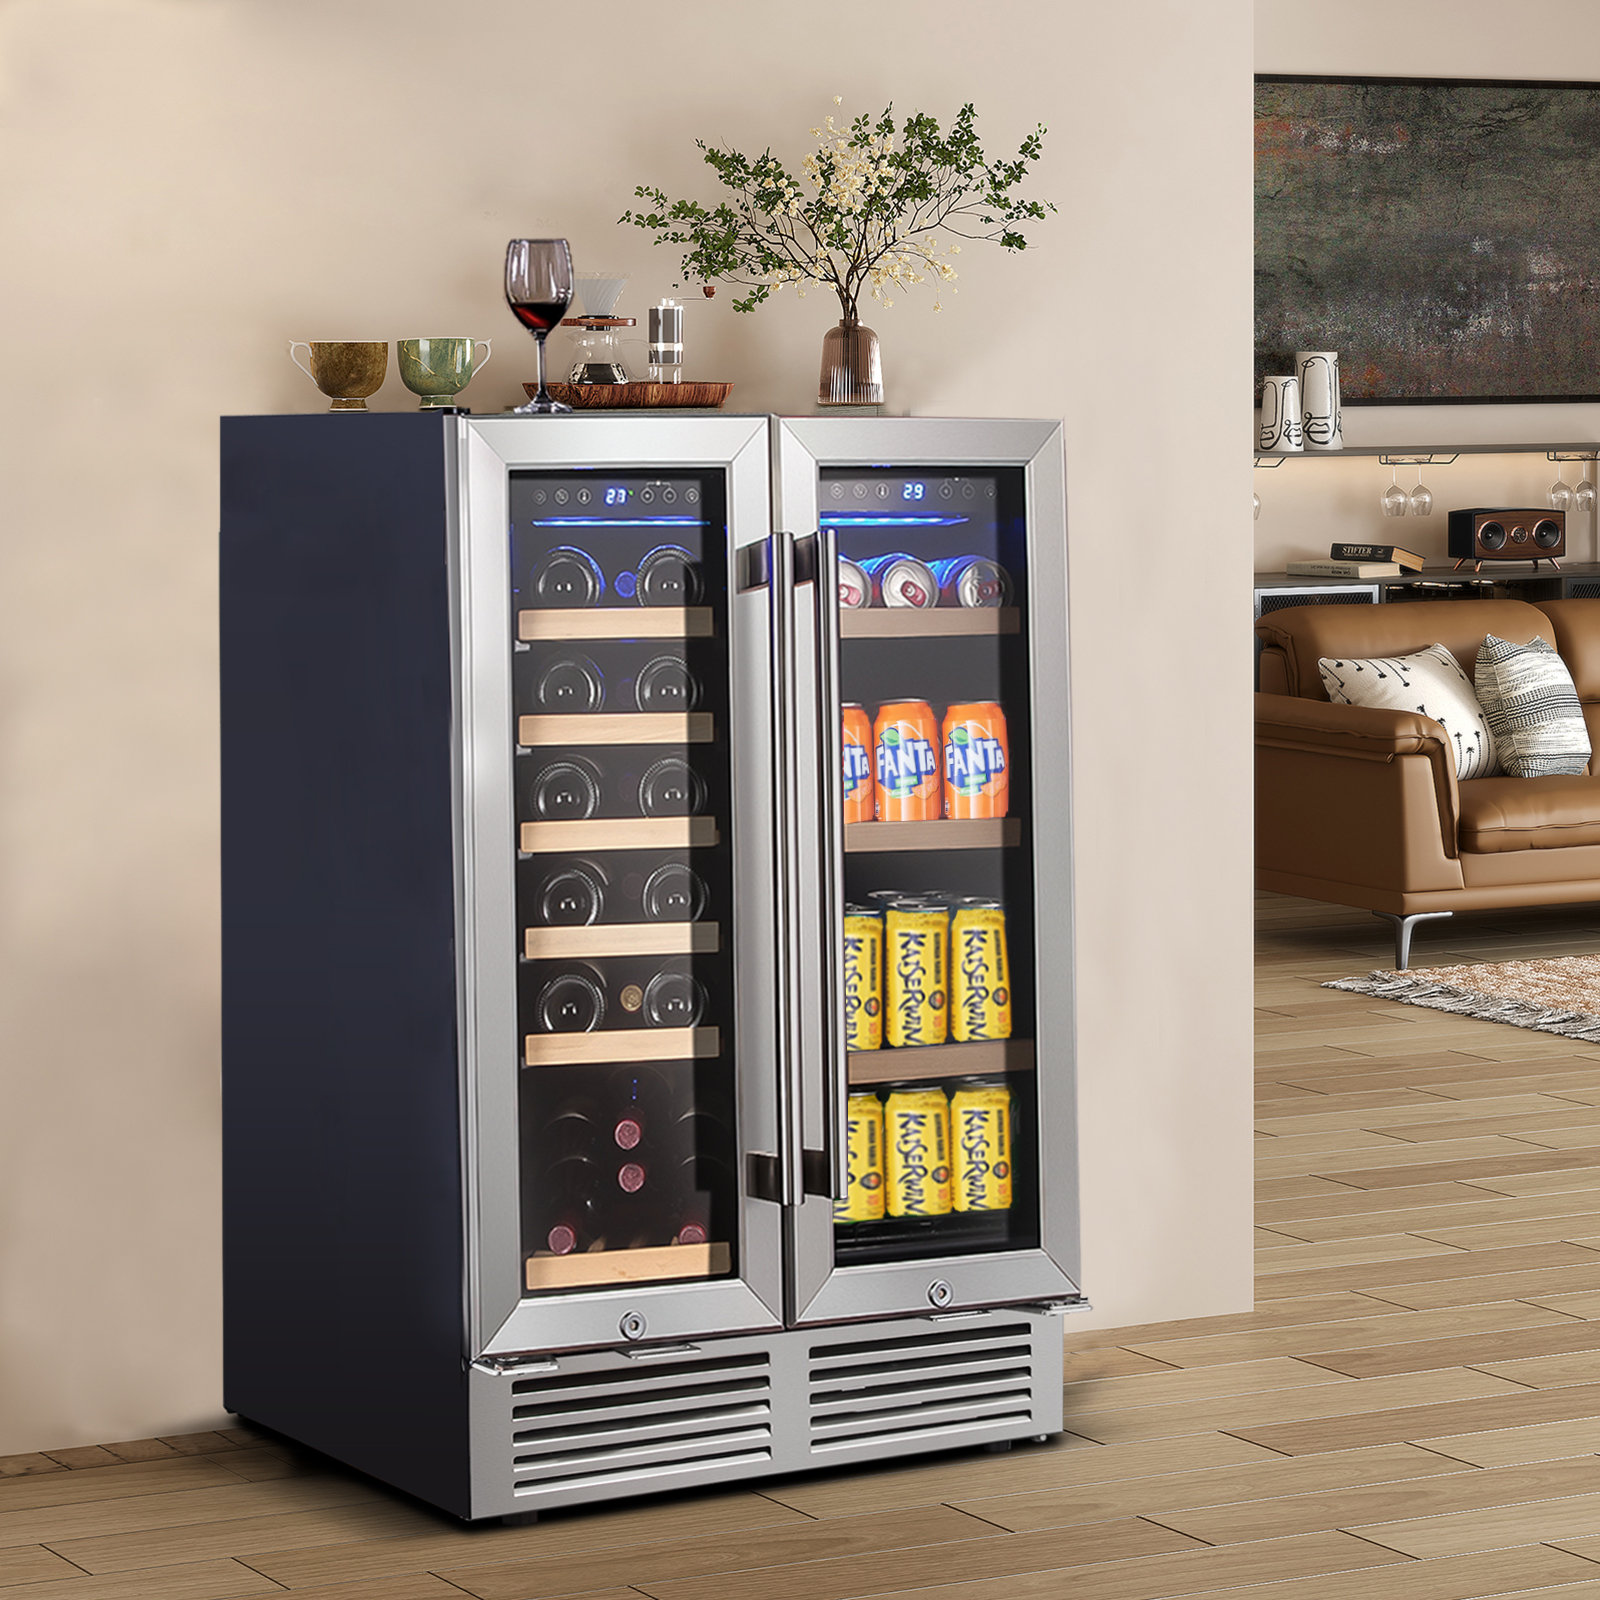 BODEGAcooler Wine and Beverage Cooler 24 Built-in Dual Zone 19 Bottles and  57 Cans